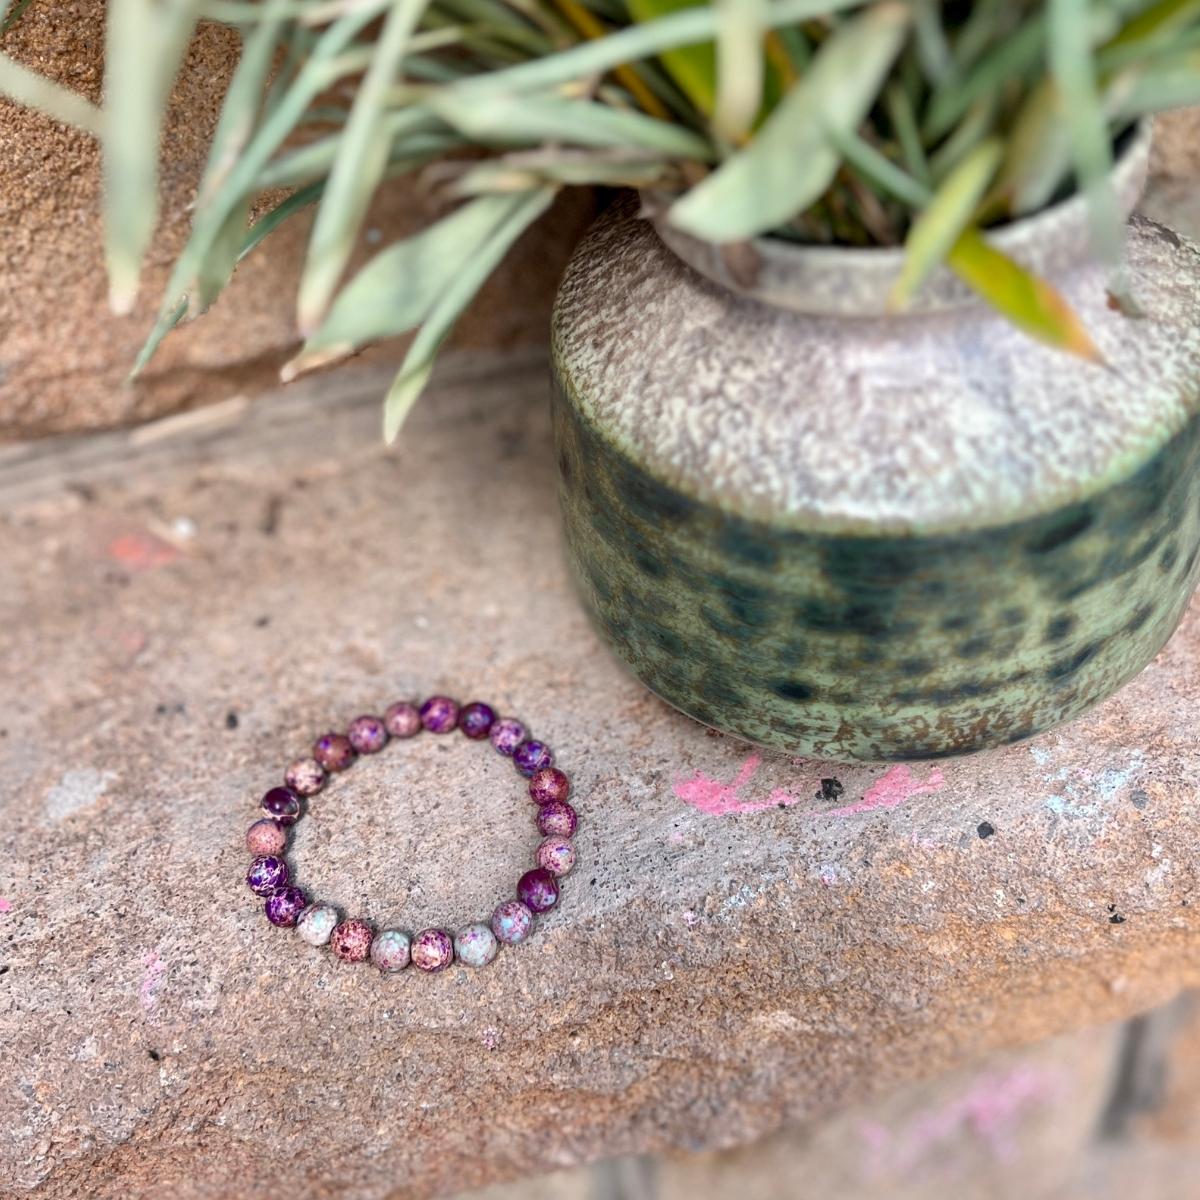 Introducing our "Heartfelt Harmony Bracelet," a beautiful expression of inner peace and emotional balance. 